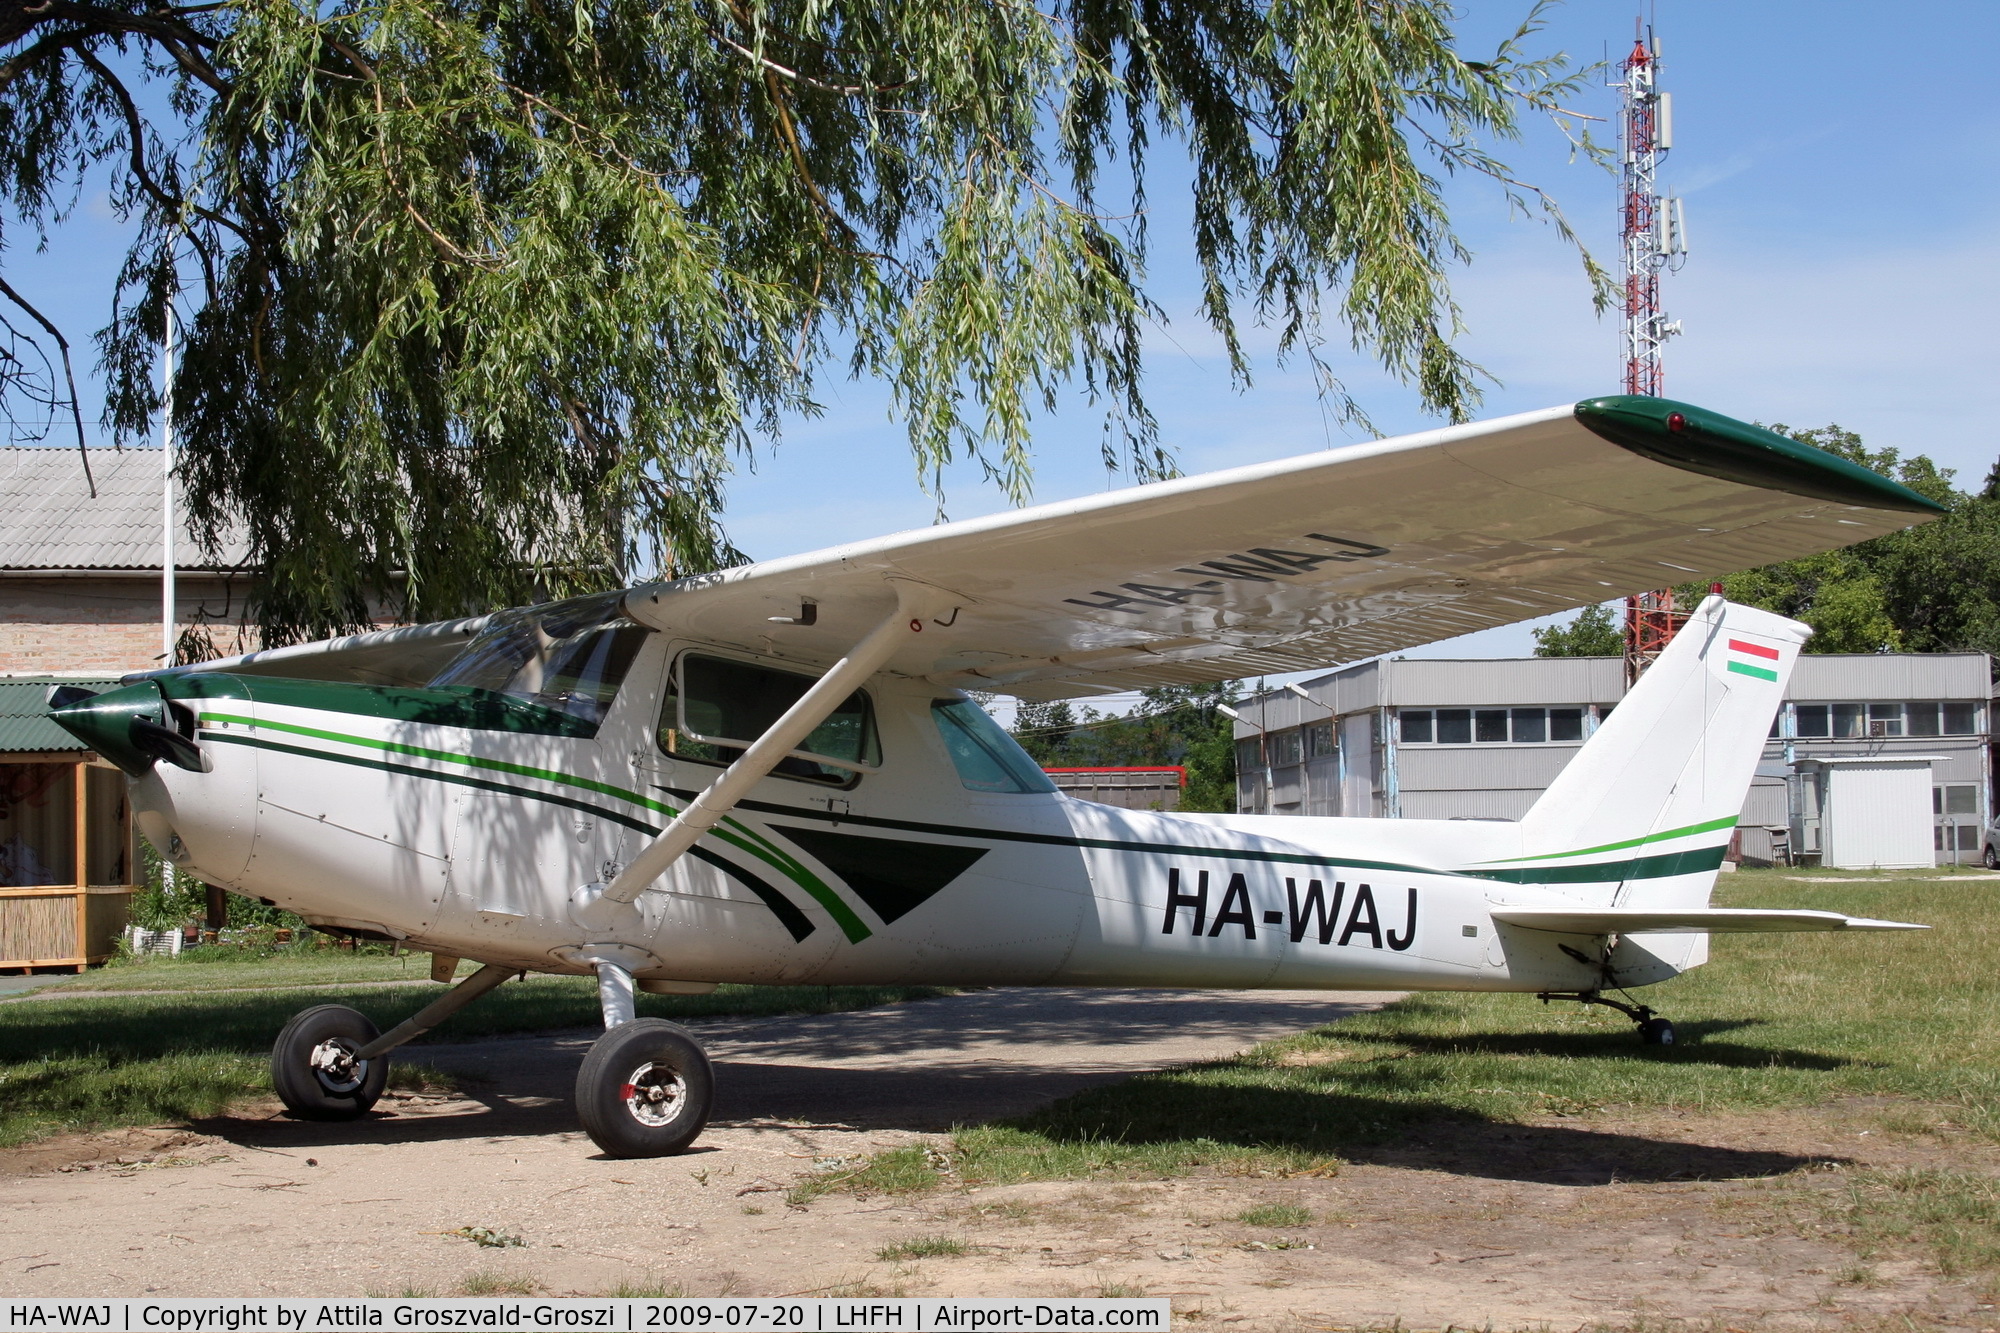 HA-WAJ, 1980 Cessna 152 C/N 152-83188, Farkashegy Airport Hungary / LHFH - That little Cessna 152 machines one, which are tail runner